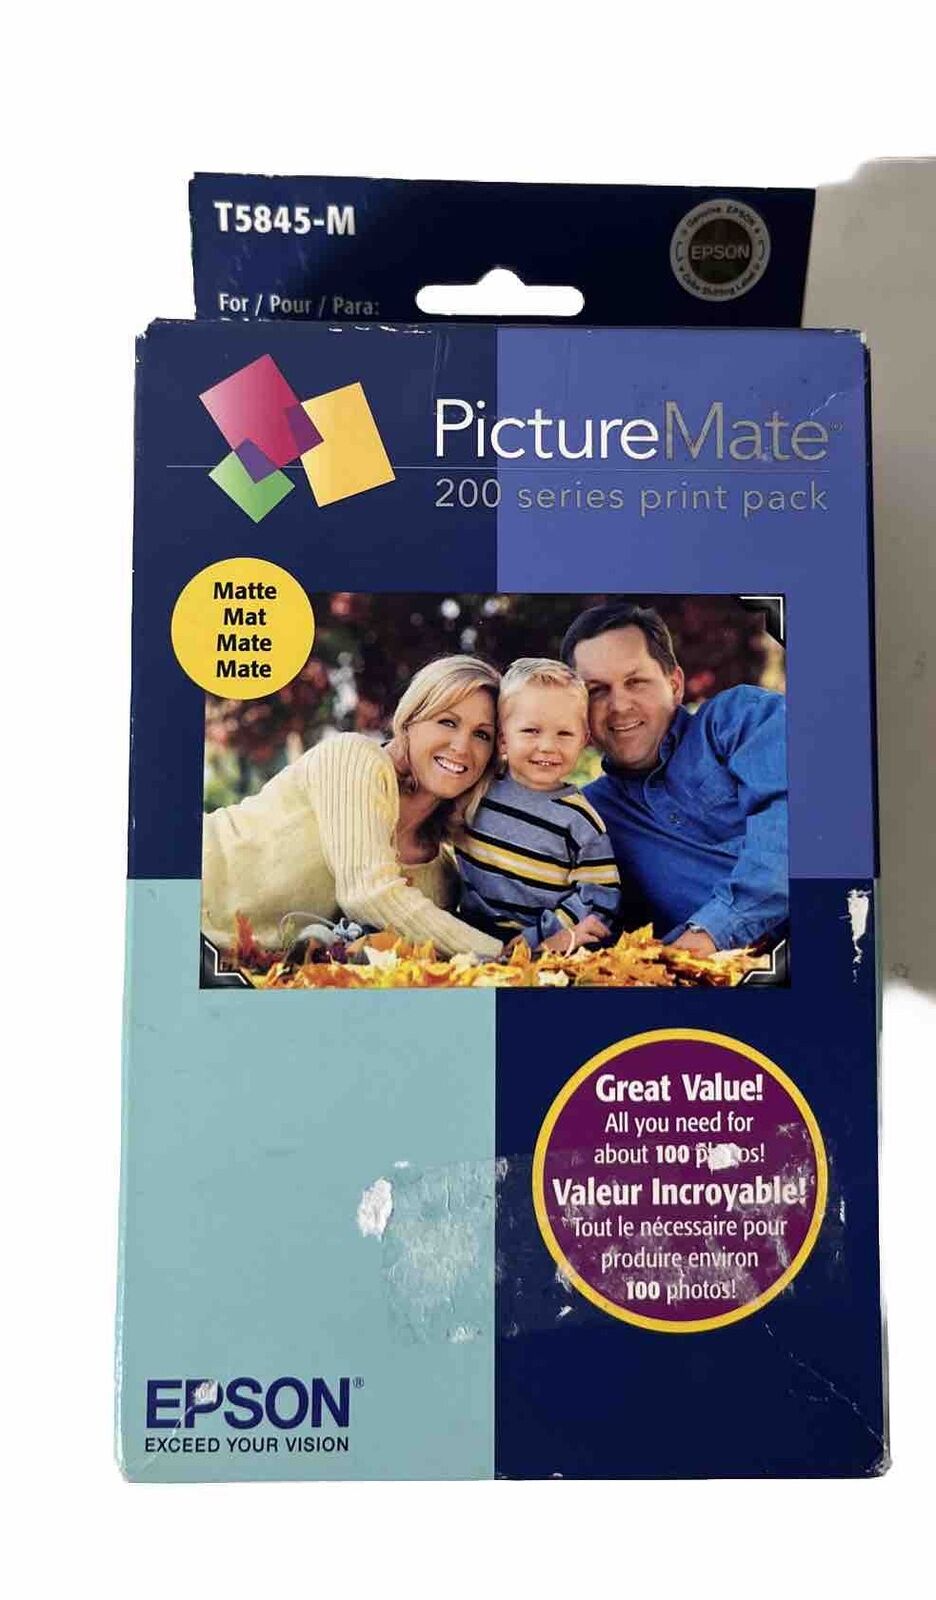 NEW Epson T5845-M PictureMate Print Pack Photo Paper PM 200 240 280